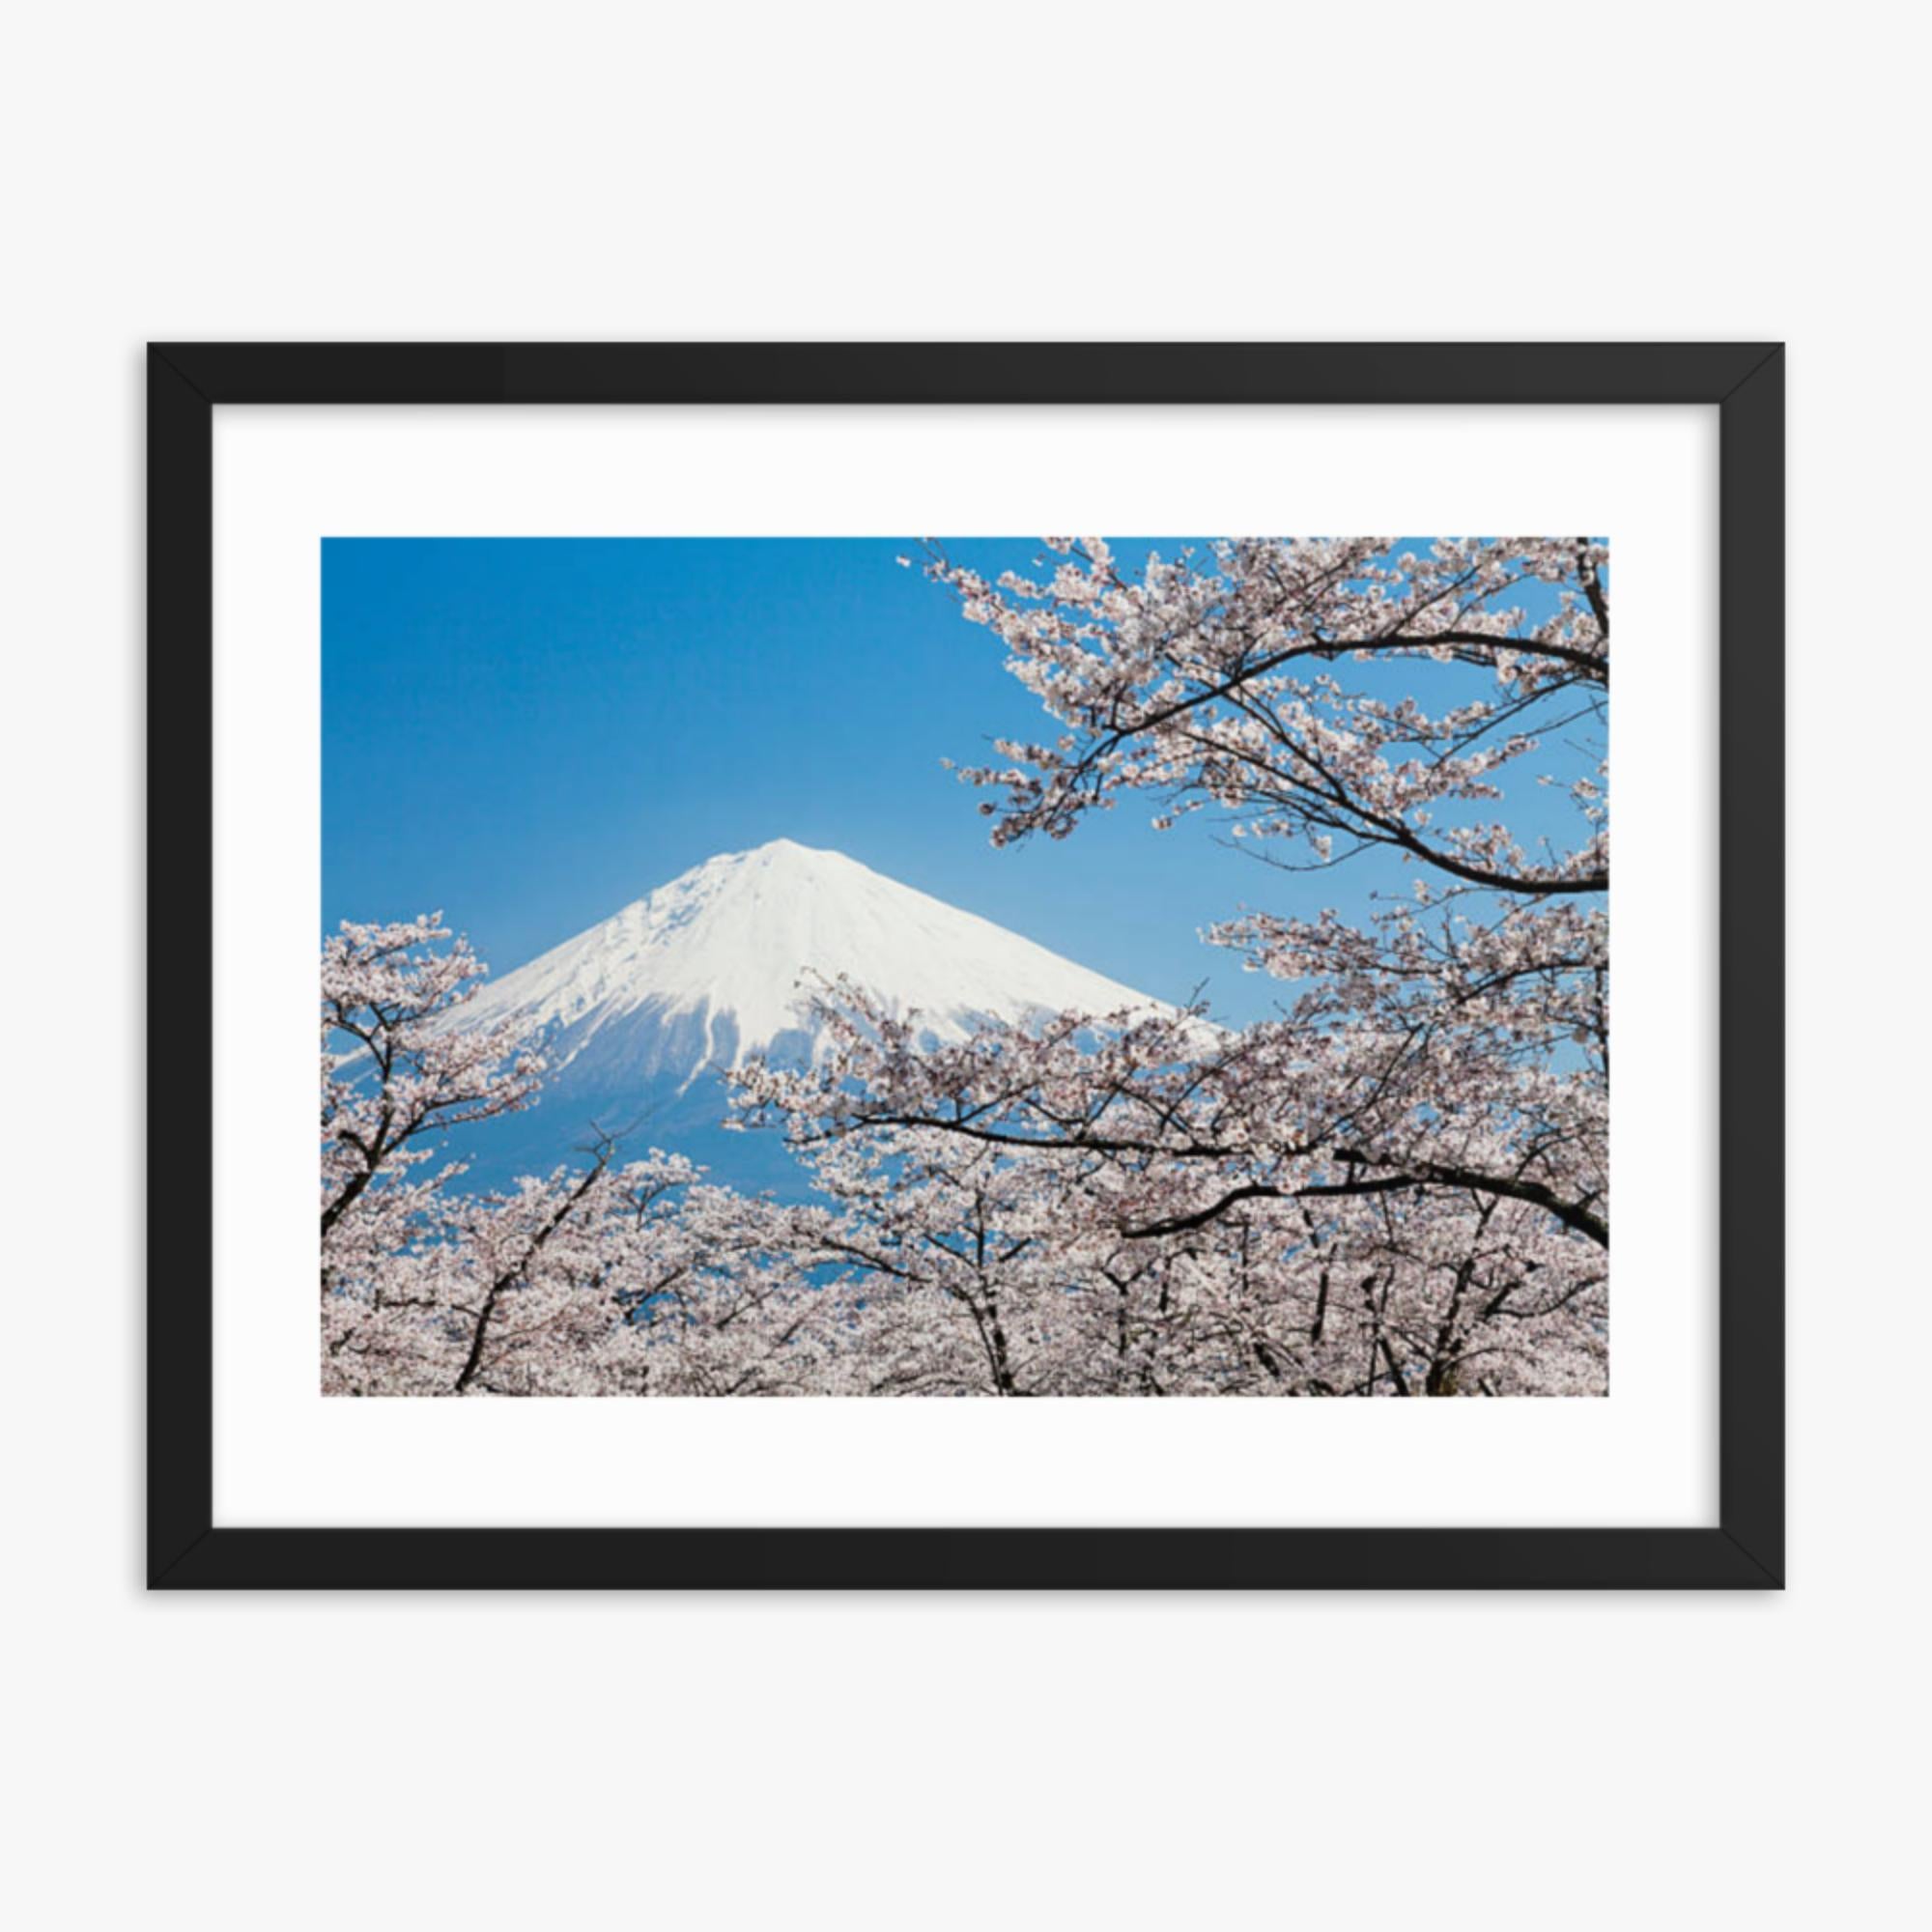 Mount Fuji & Cherry Blossoms 18x24 in Poster With Black Frame